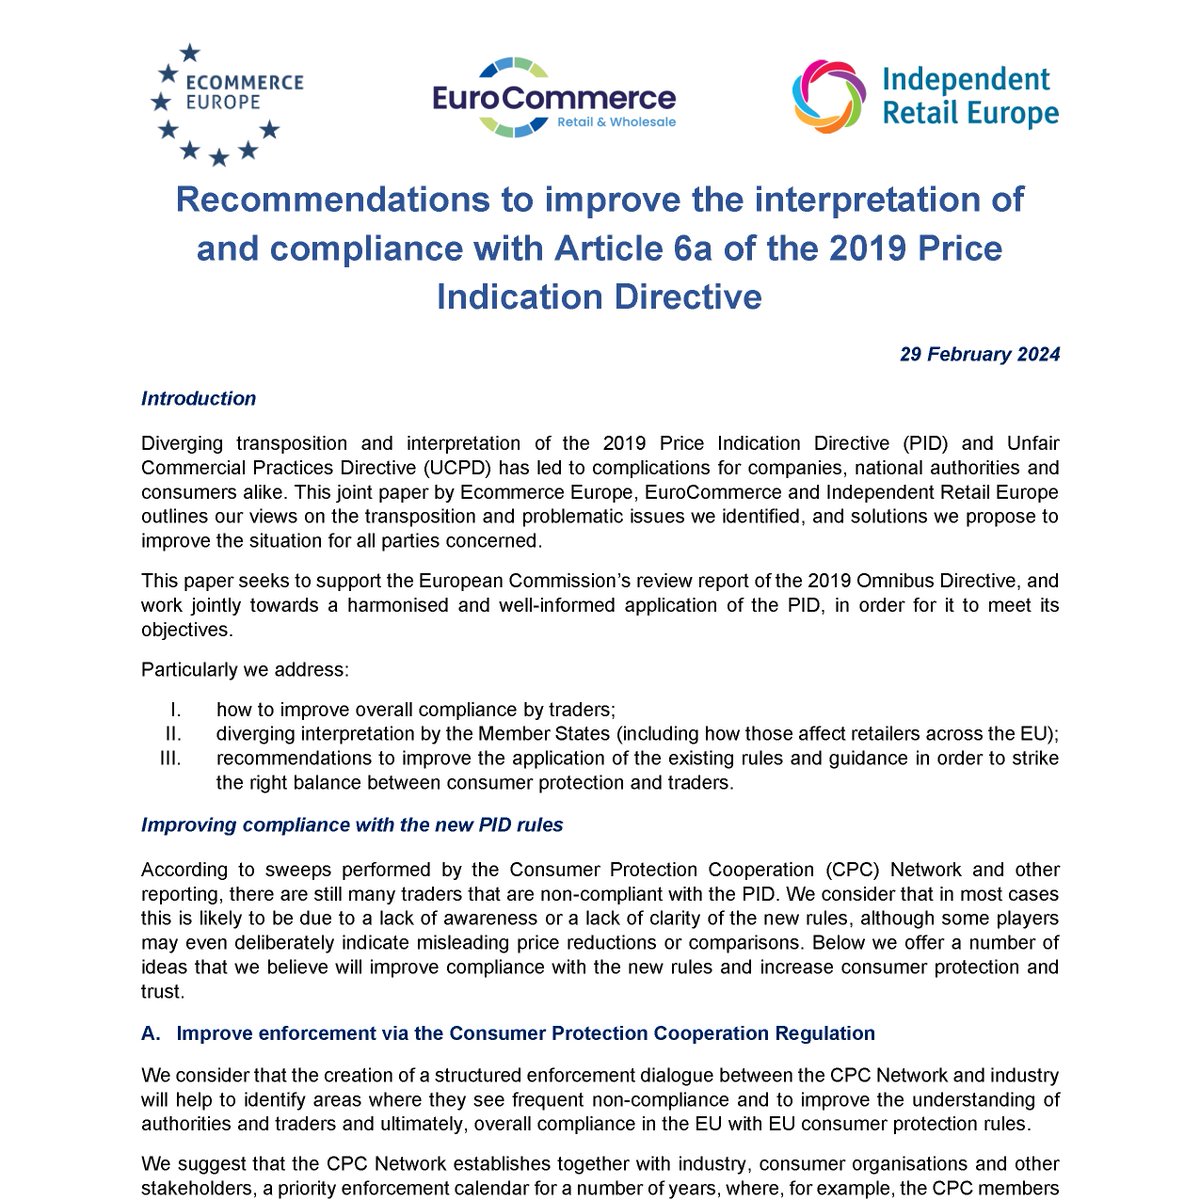 Today, European retail associations (@Ecommerce_EU, @EuroCommerce & @IndeRetailEU) finalised a position paper with our recommendations to improve the interpretation and compliance with price announcements. 1/2